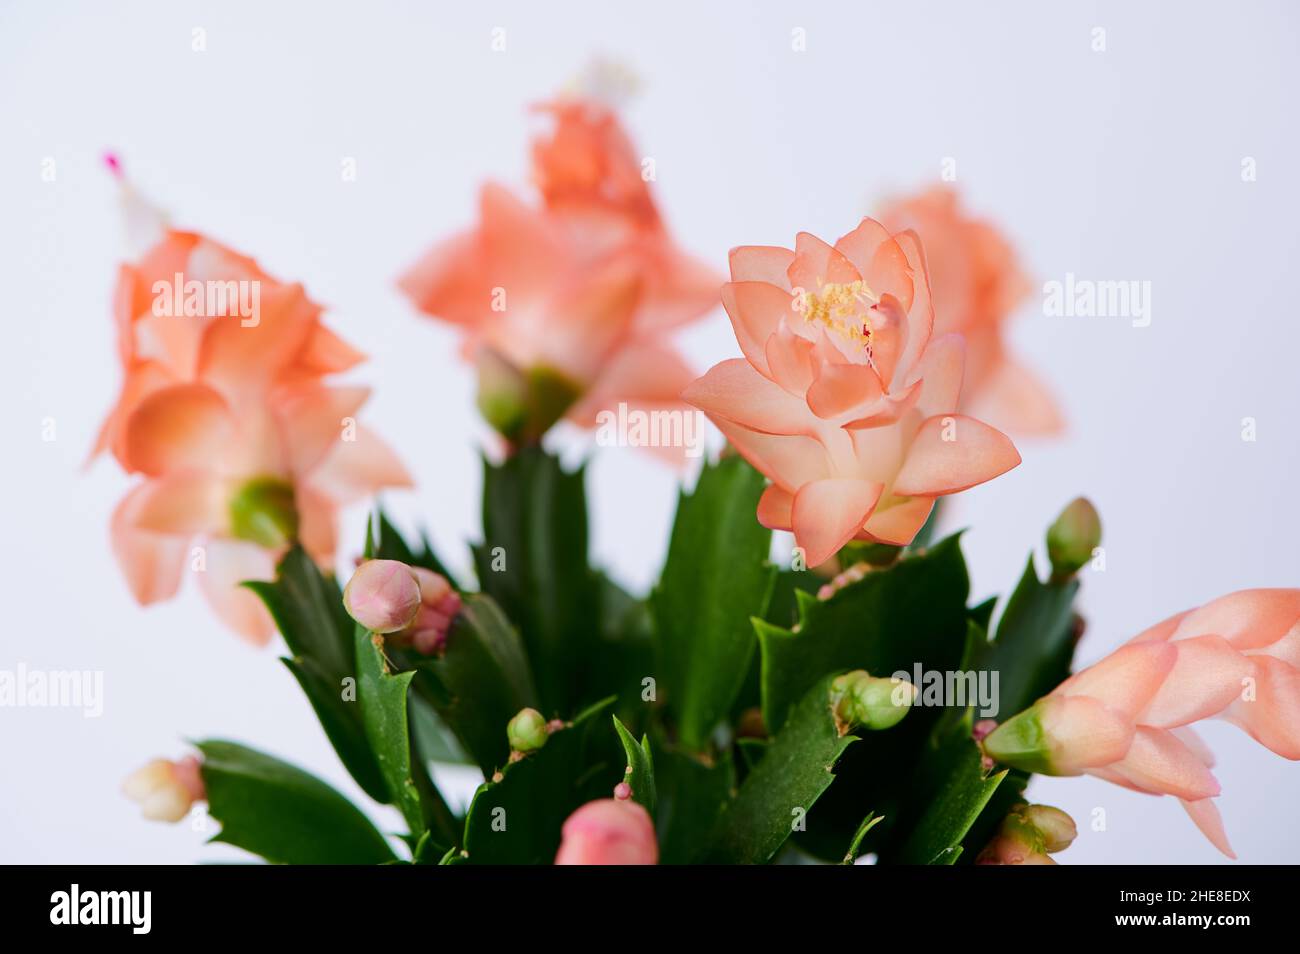 Blooming Christmas Cactus Macro Photo With Selective Focus Against White Background Stock Photo